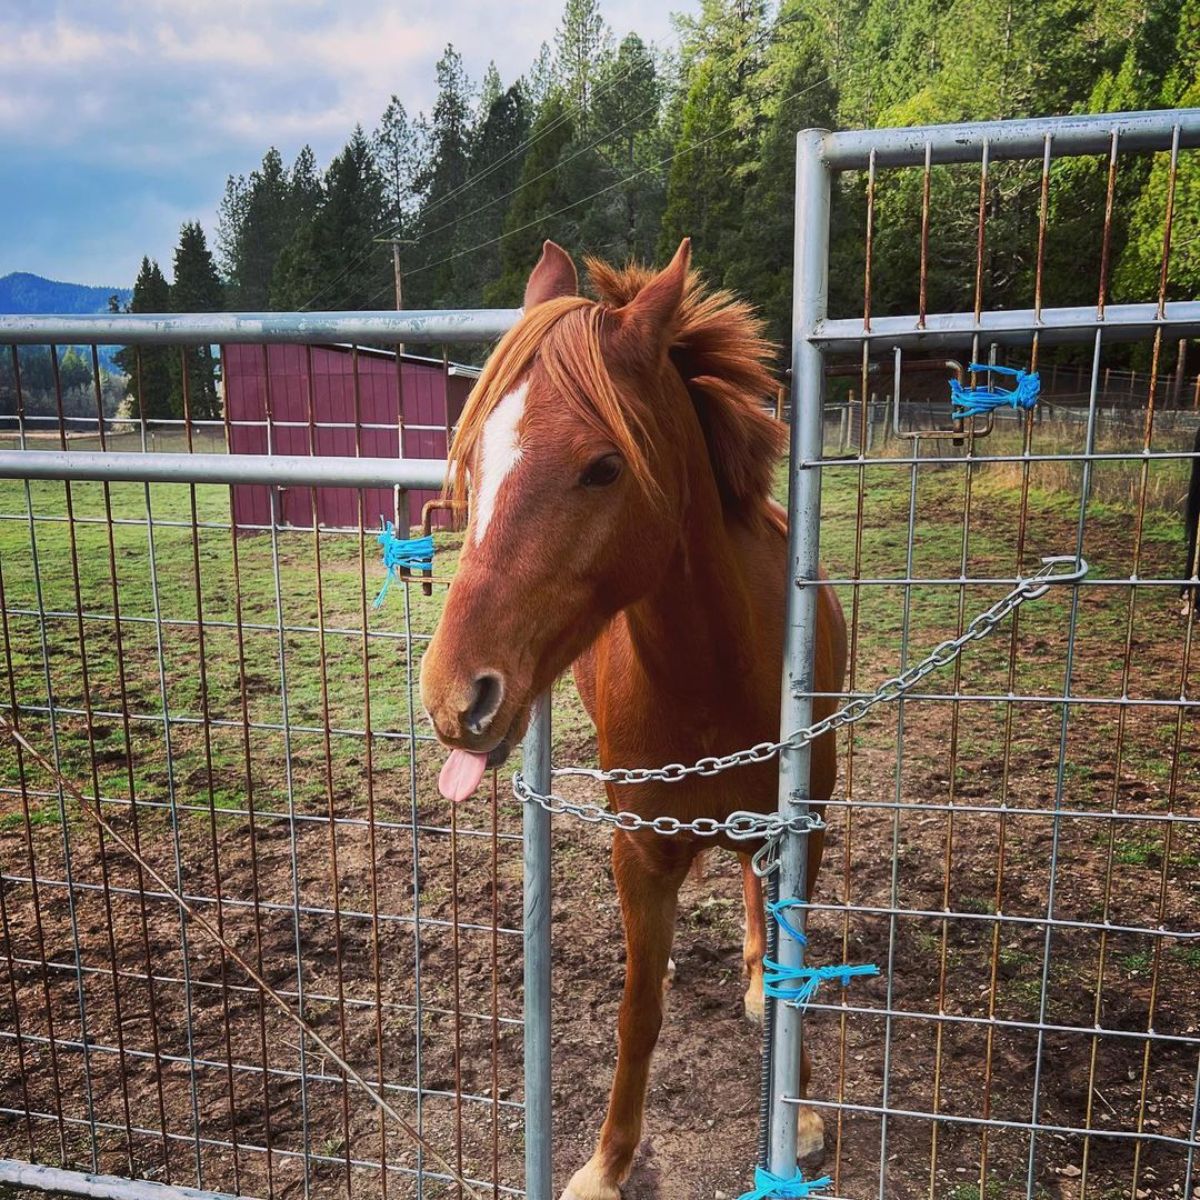 A brown horse sticks out its tongue and stands at a metal fence.